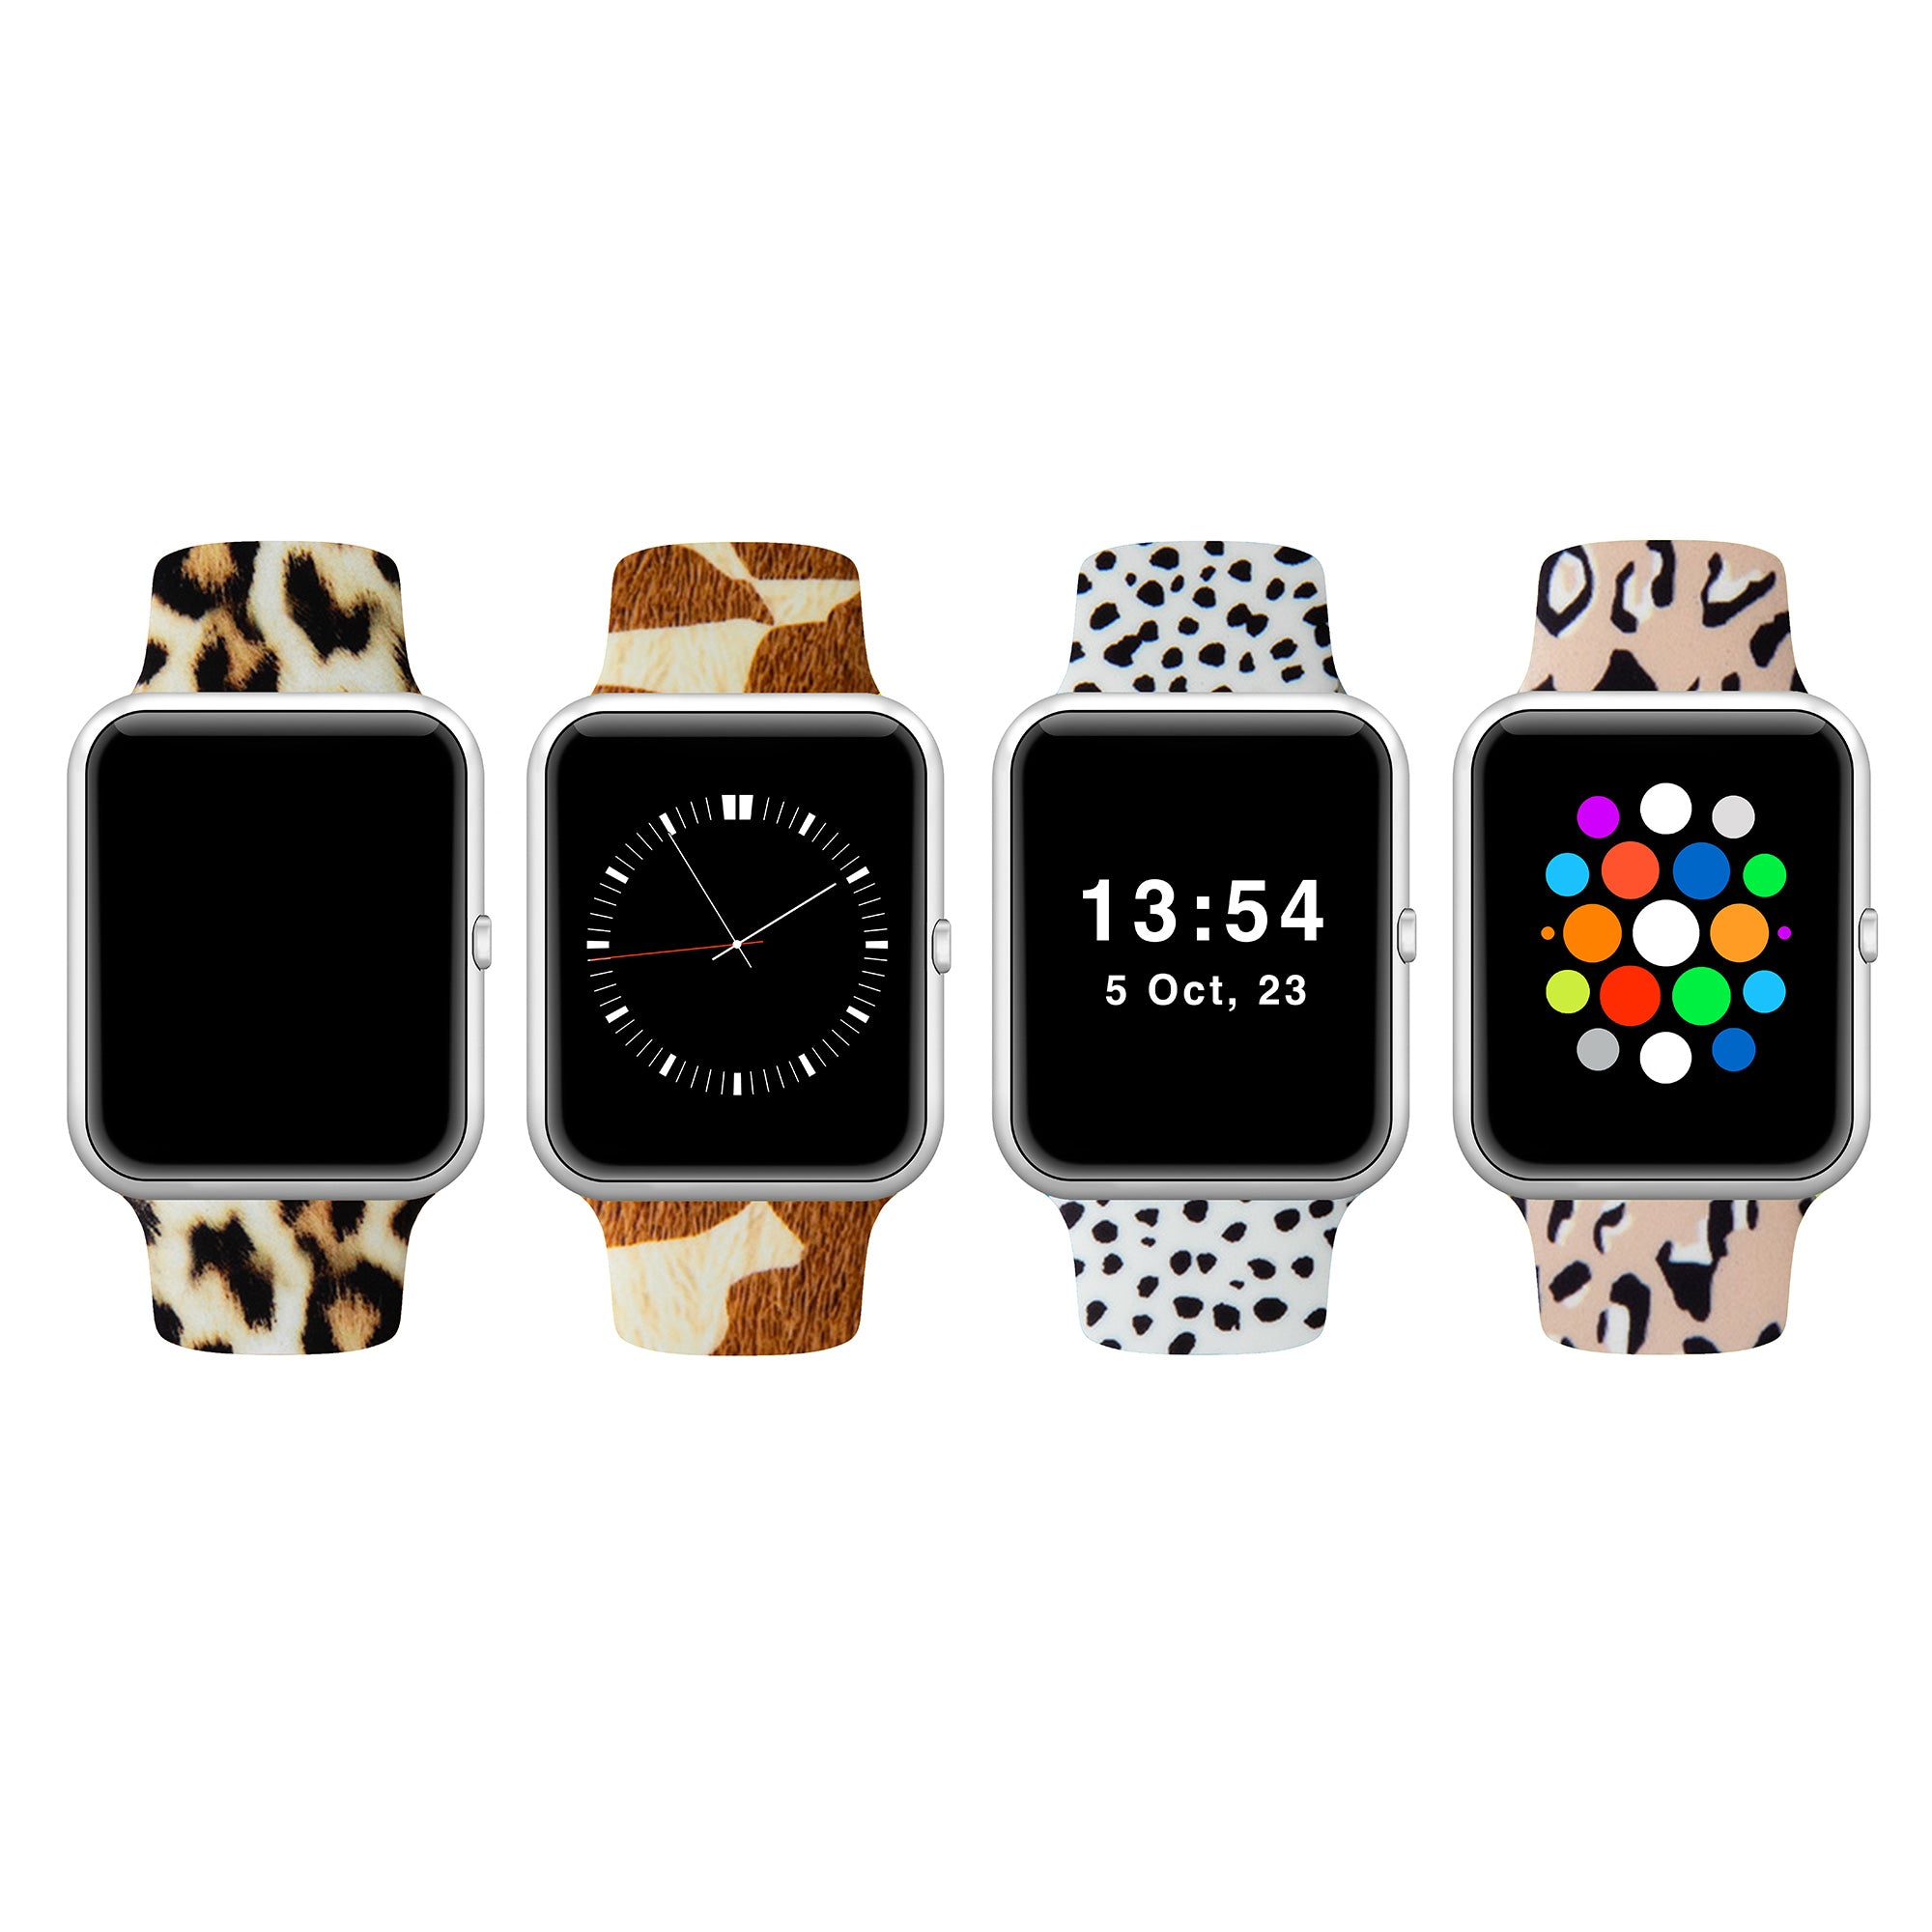 Patterned Silicone Apple Watch Band 38mm/40mm 42mm/44mm - Black & White Tie-Dye - 38mm/40mm